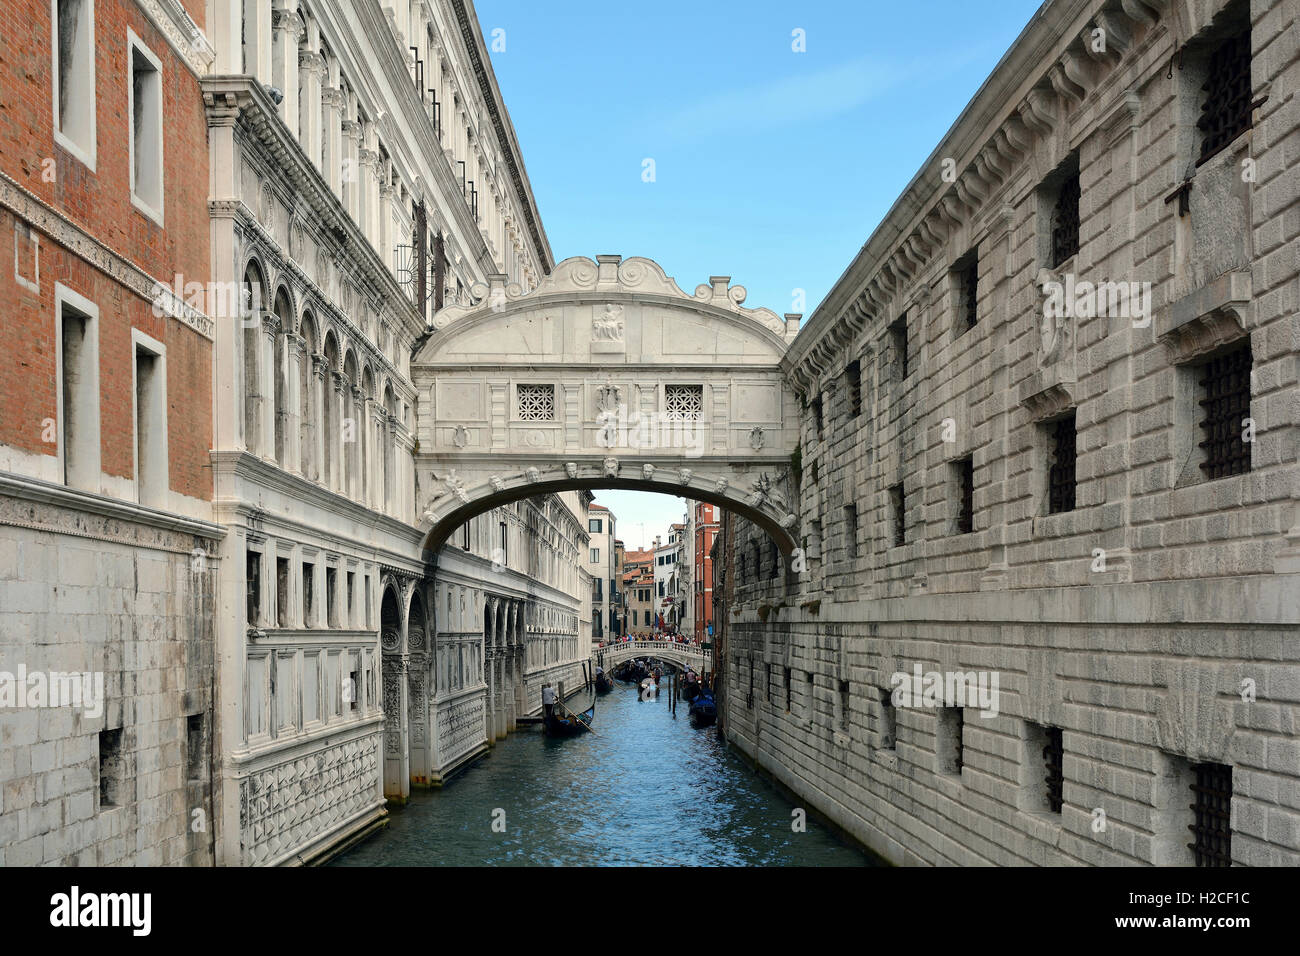 Bridge of Sighs between the Doge's Palace and the prison Prigioni Nuove of Venice in Italy. Stock Photo